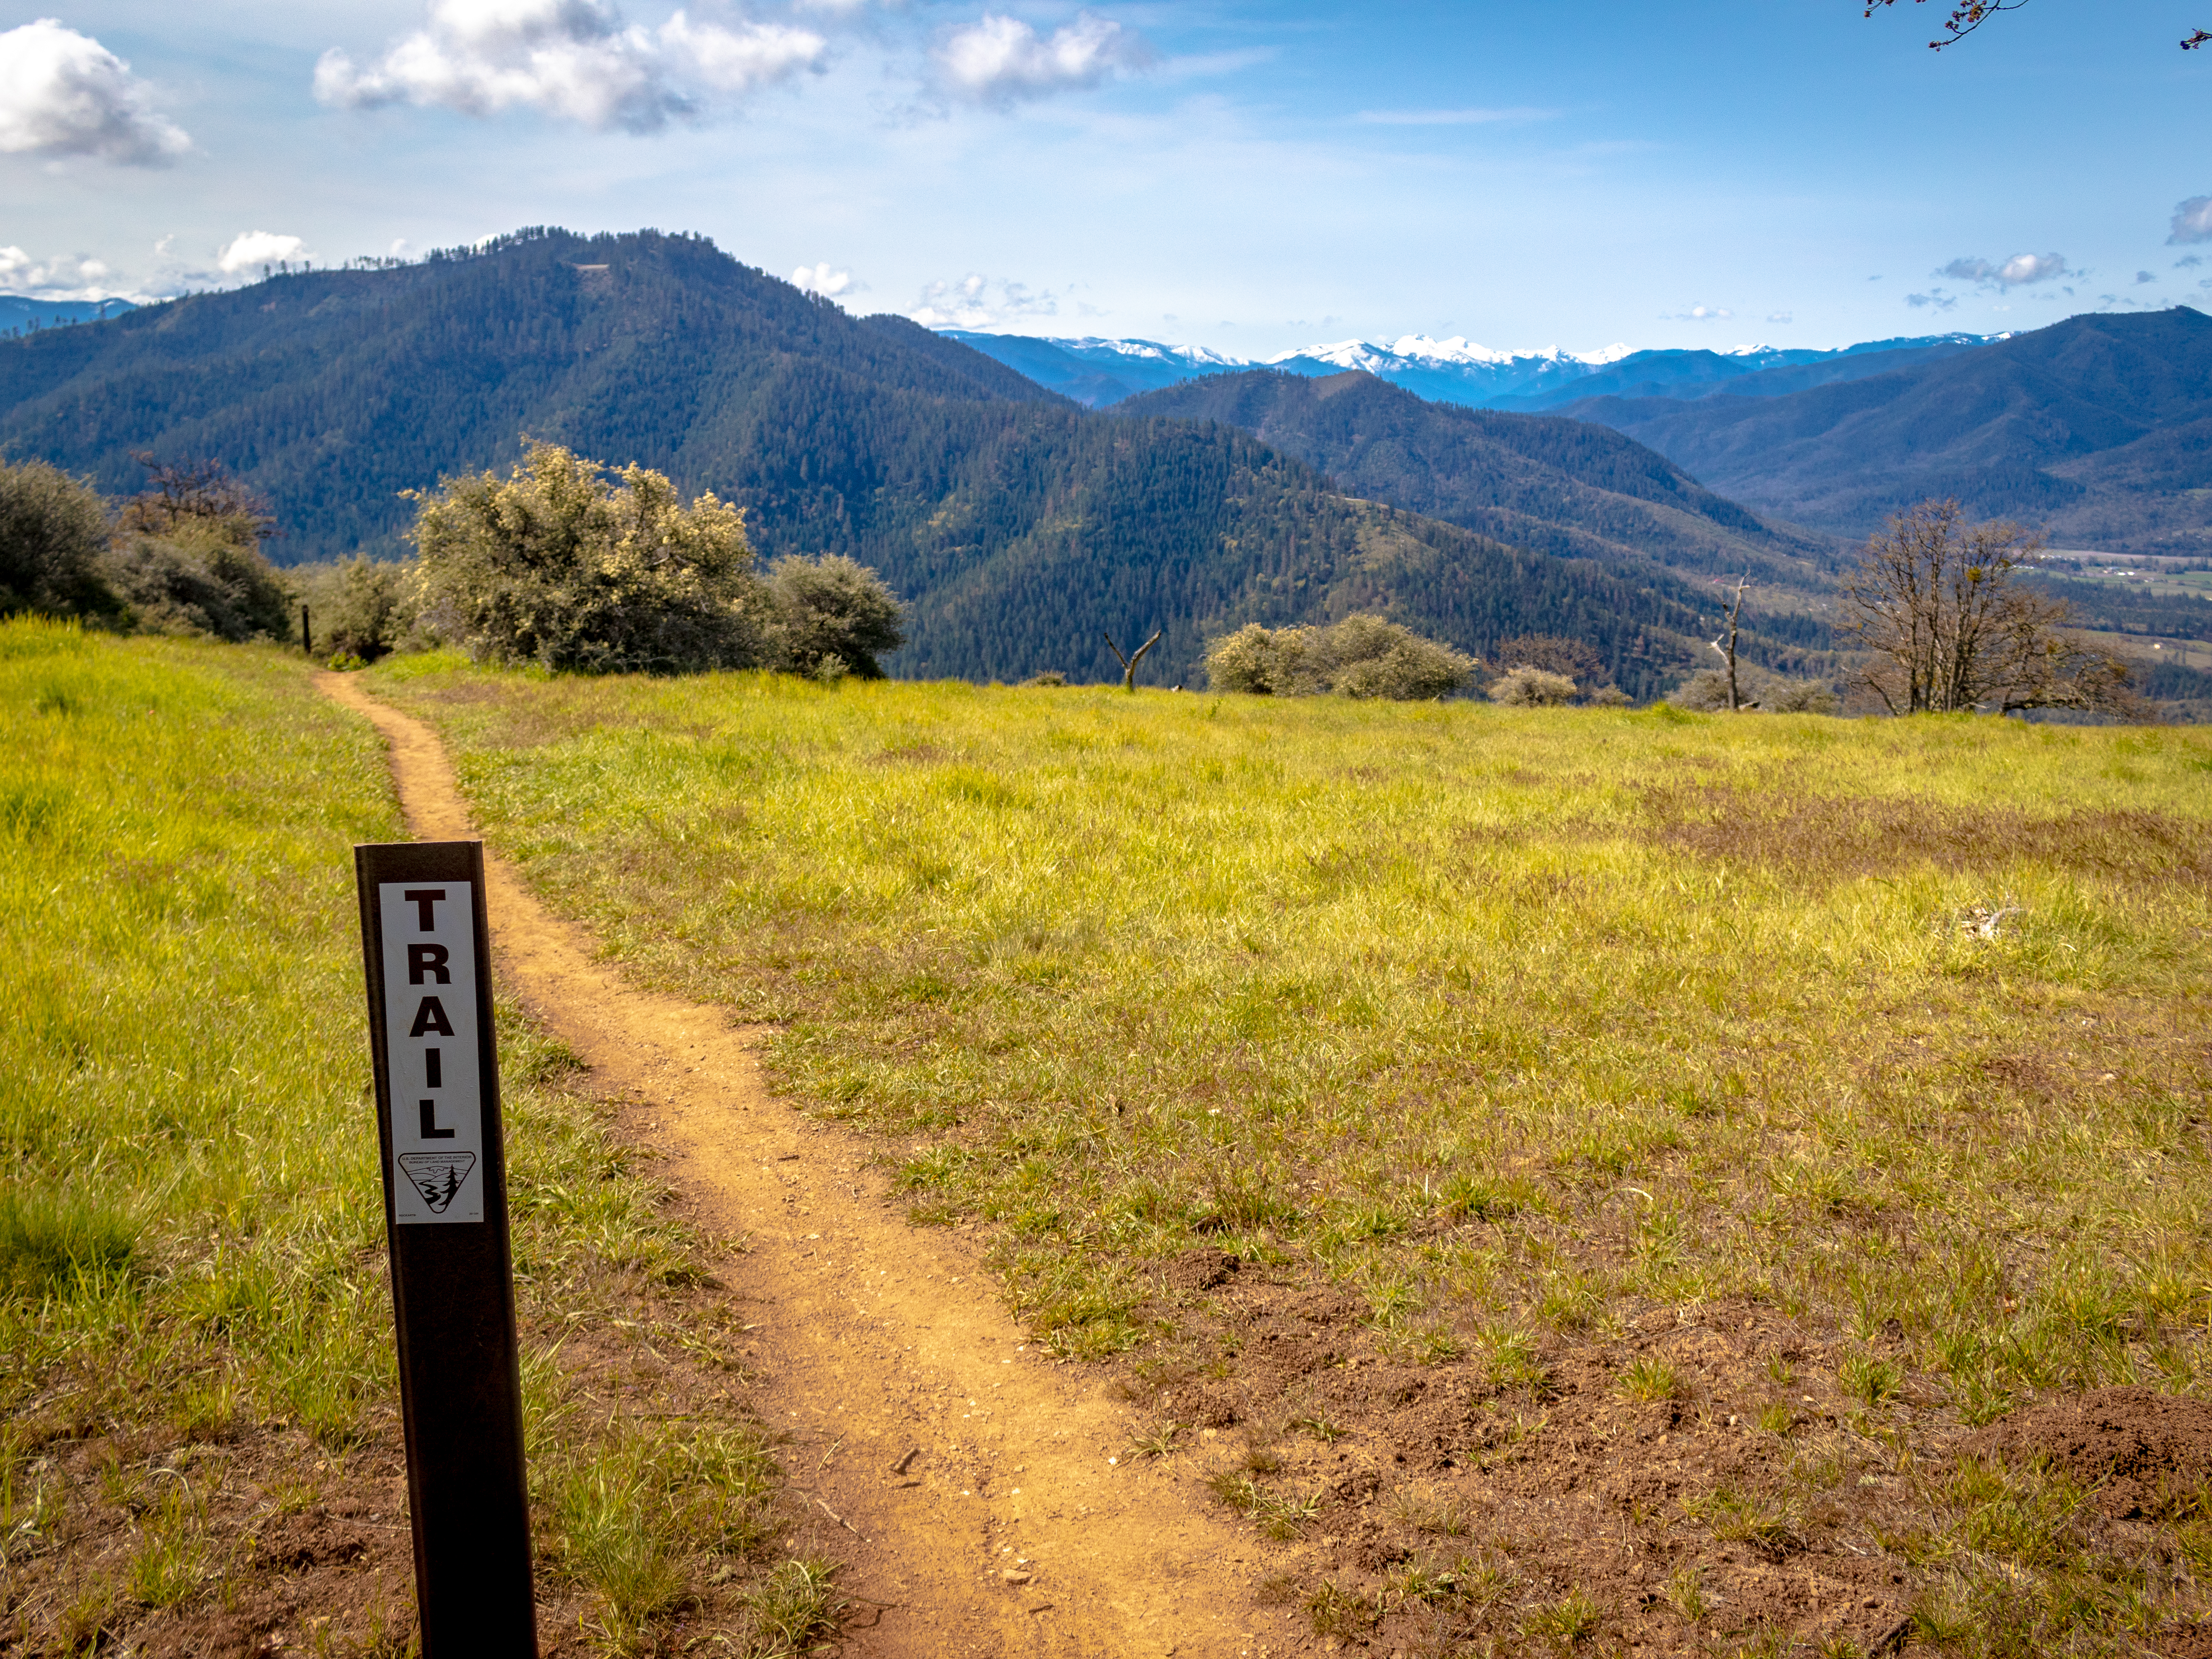 East Applegate Ridge Trail, EART, things to do, hiking, hikes, trails, favorite locations, outdoor adventure, Medford